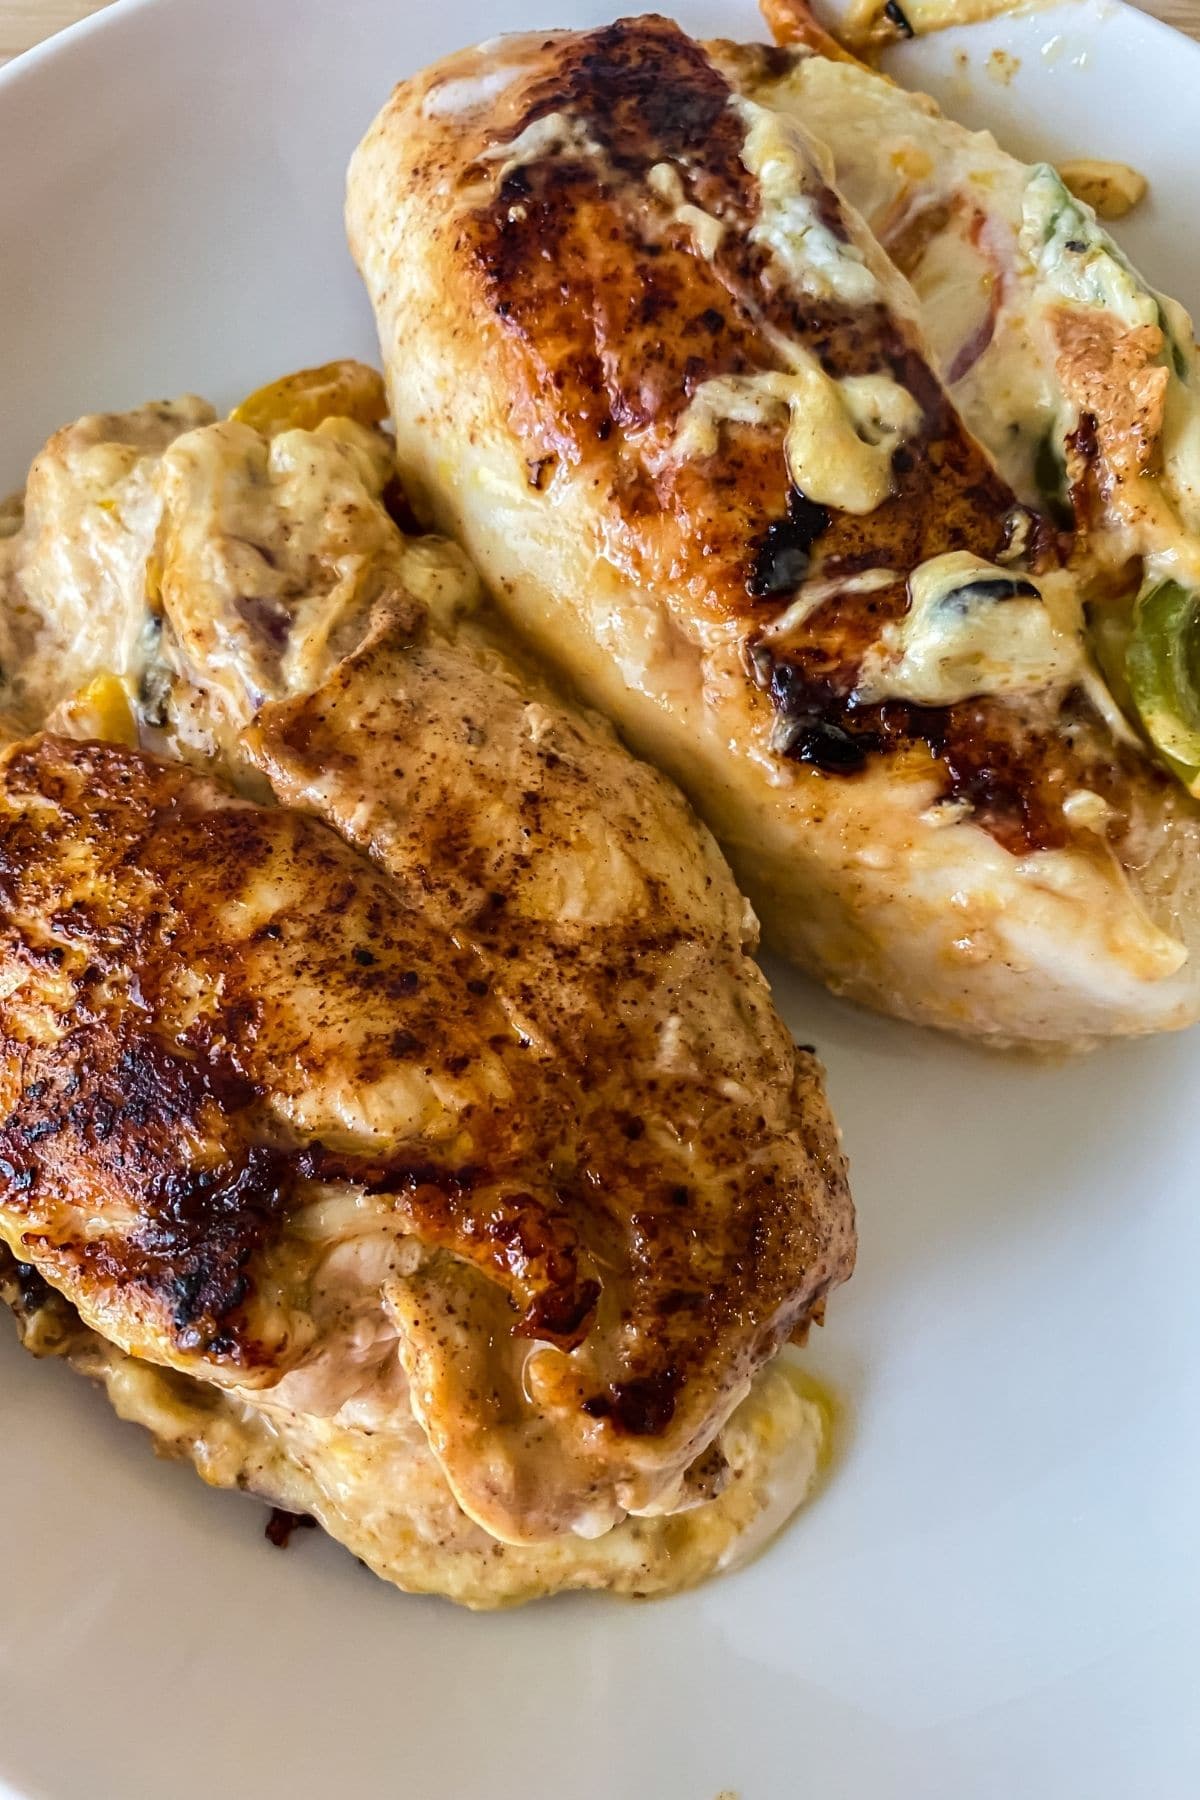 two chicken breasts on plate with cheese stuffing